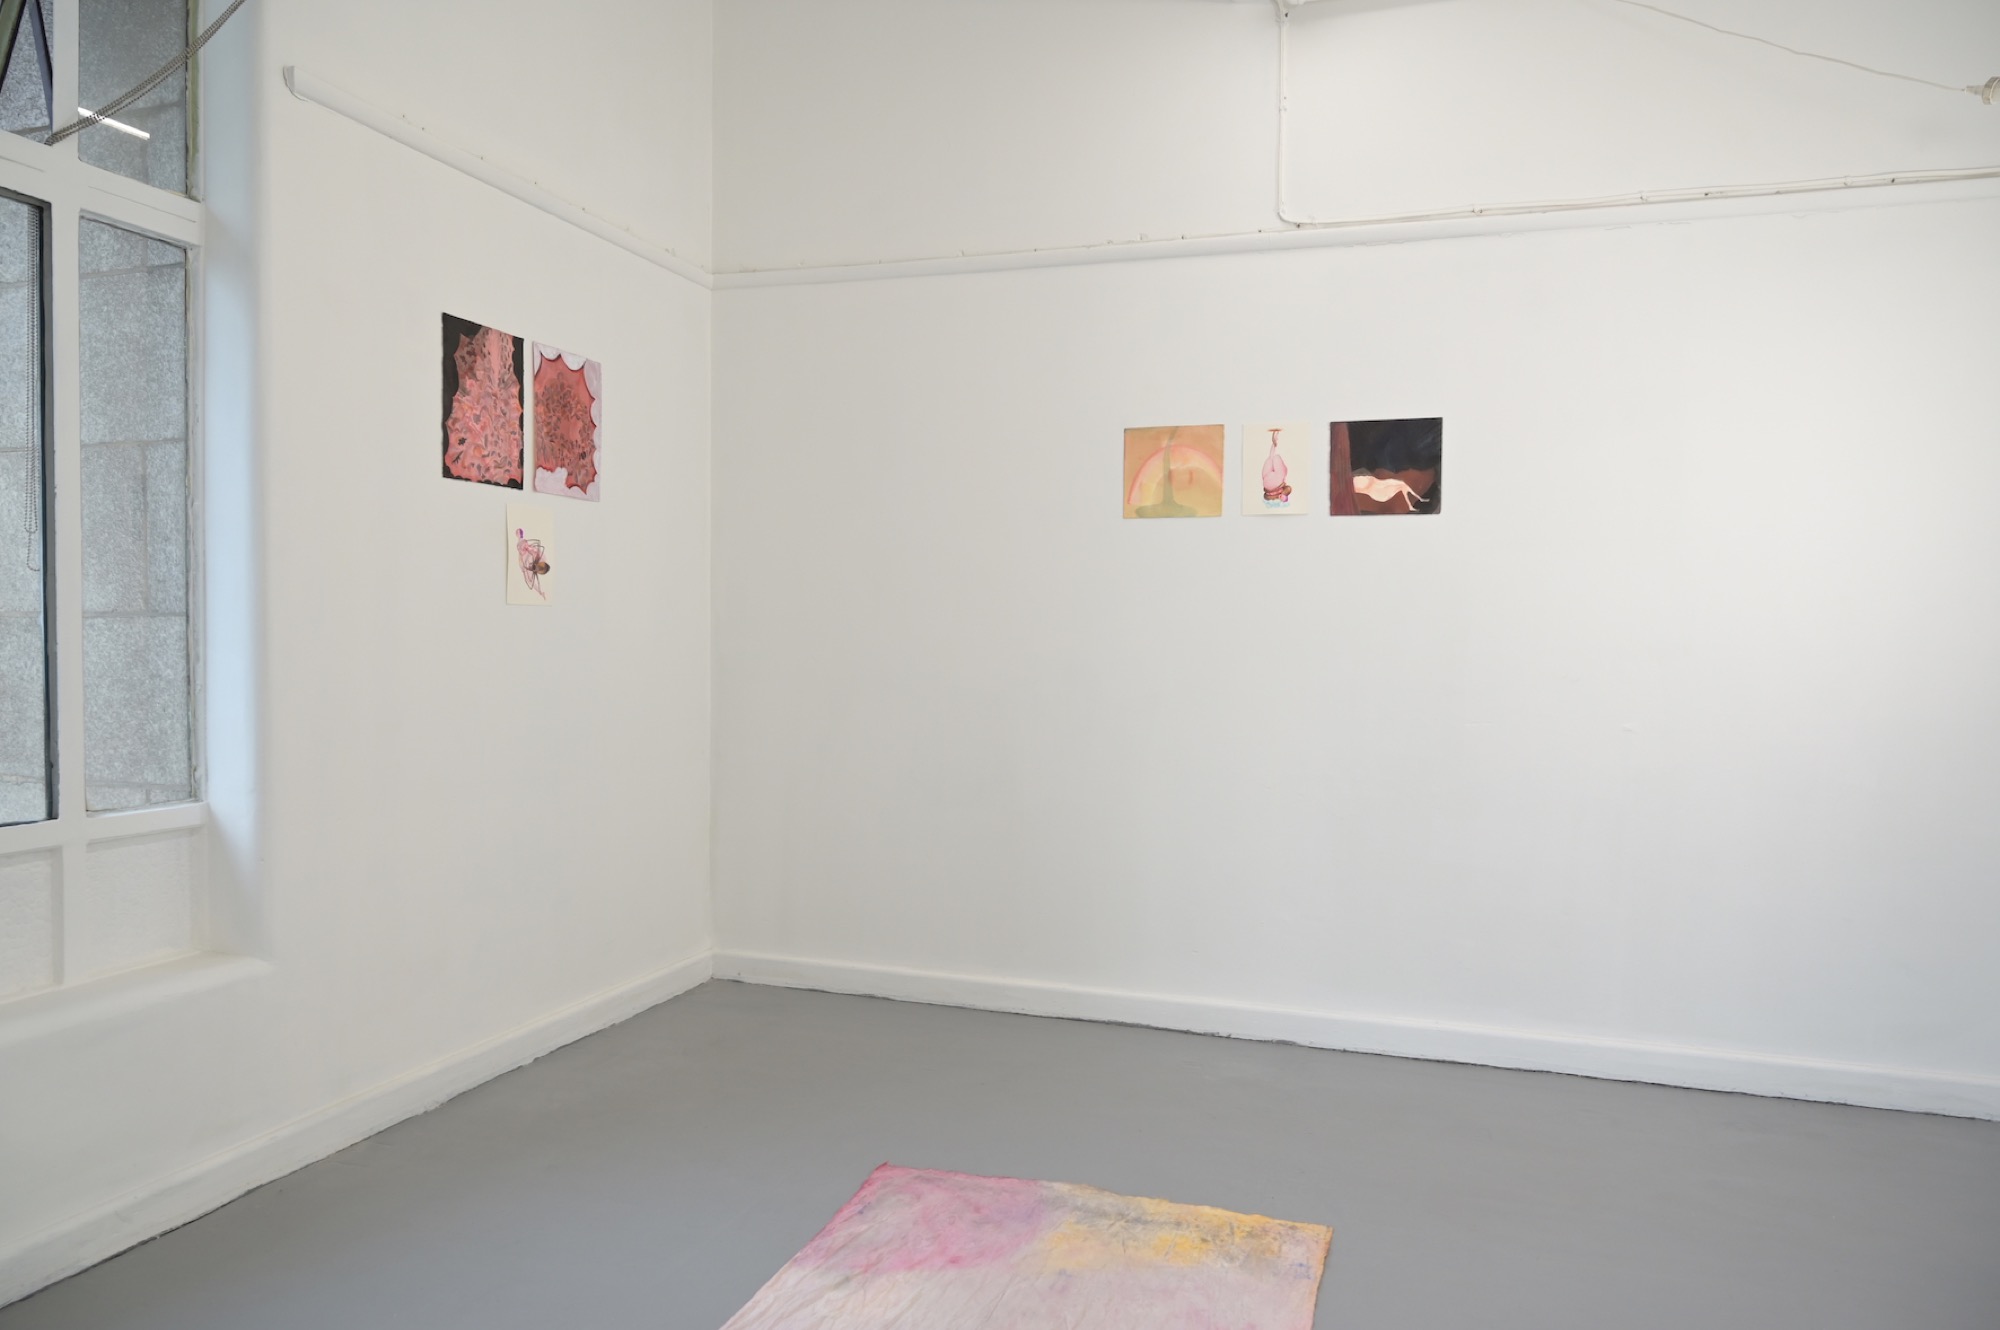 Noriko Nakamura and Inbal Nissim, Spring/Sprung installation shot. Courtesy the artists and Caves.